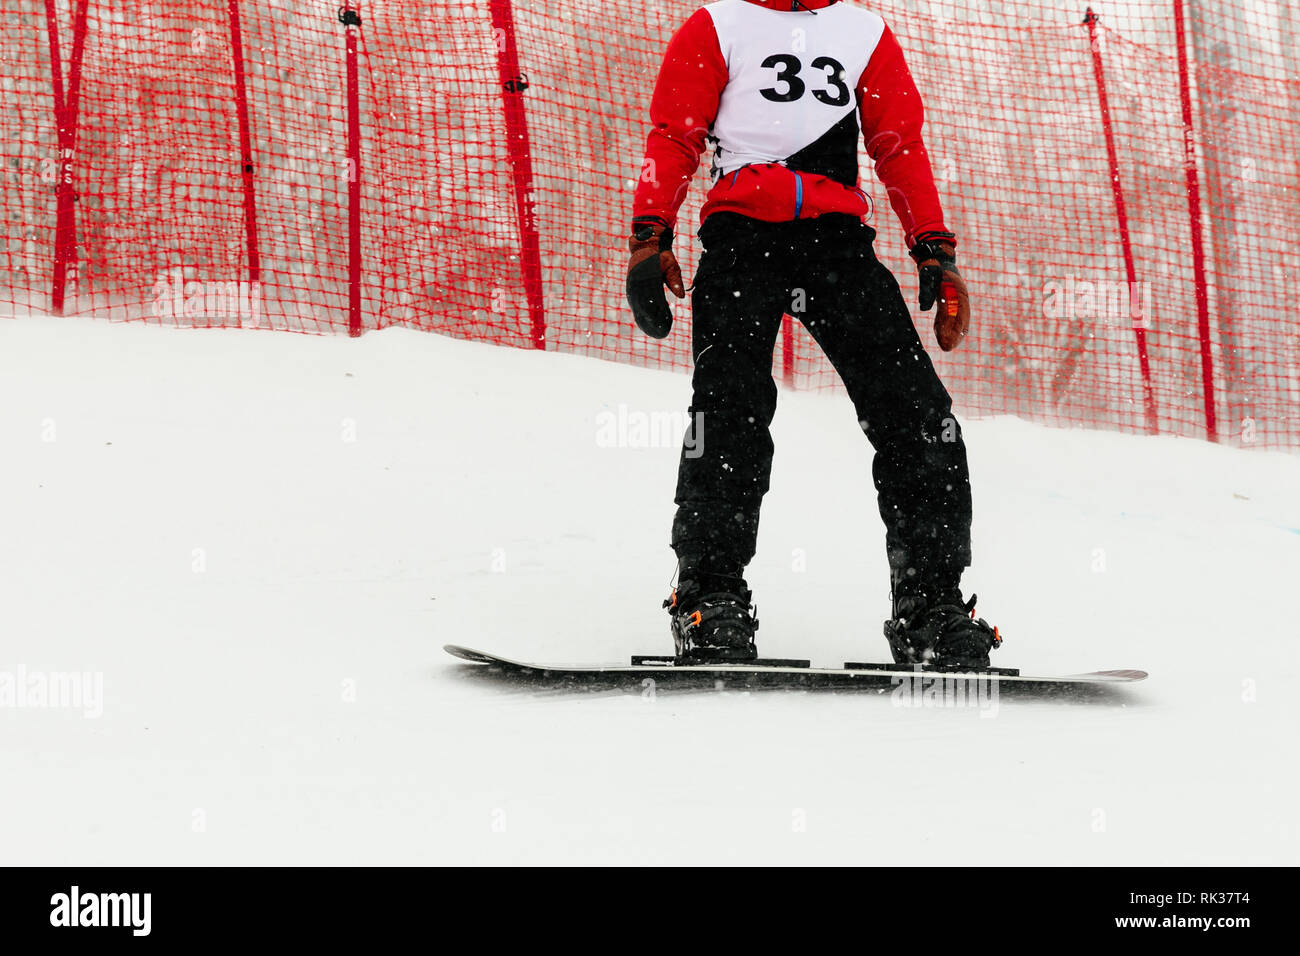 athlete snowboarder riding on track snowboarding competition Stock Photo